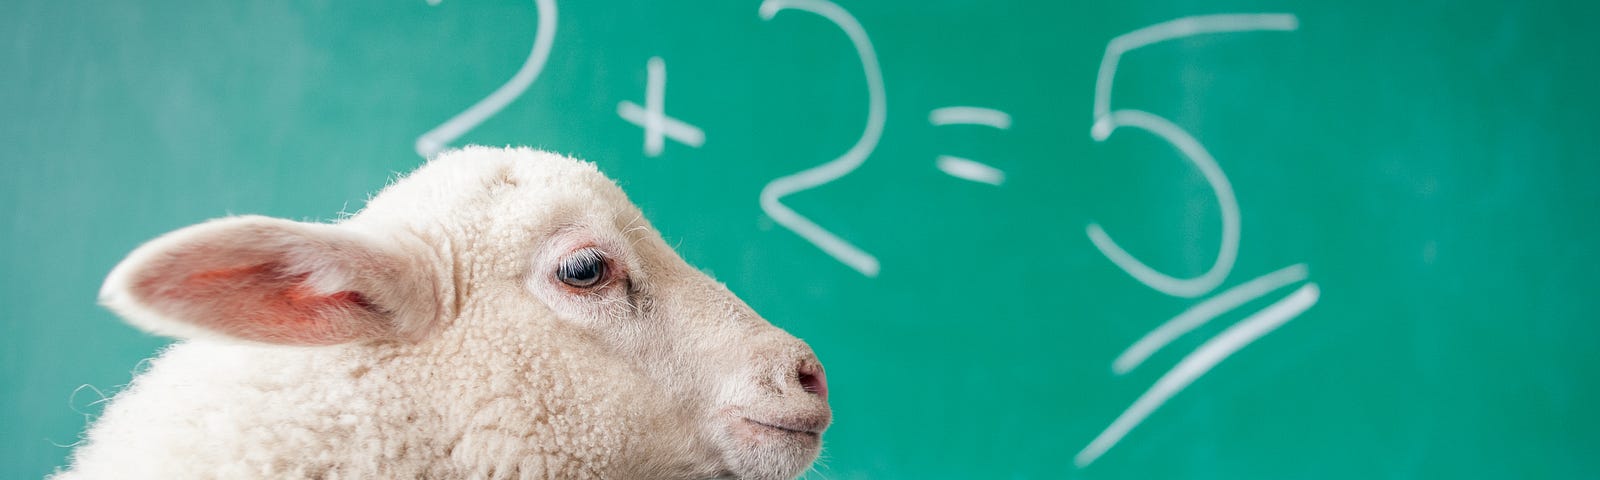 A sheep (on the left) looks at a blackboard (actually green in color) on which is written 2 + 2 = 5.